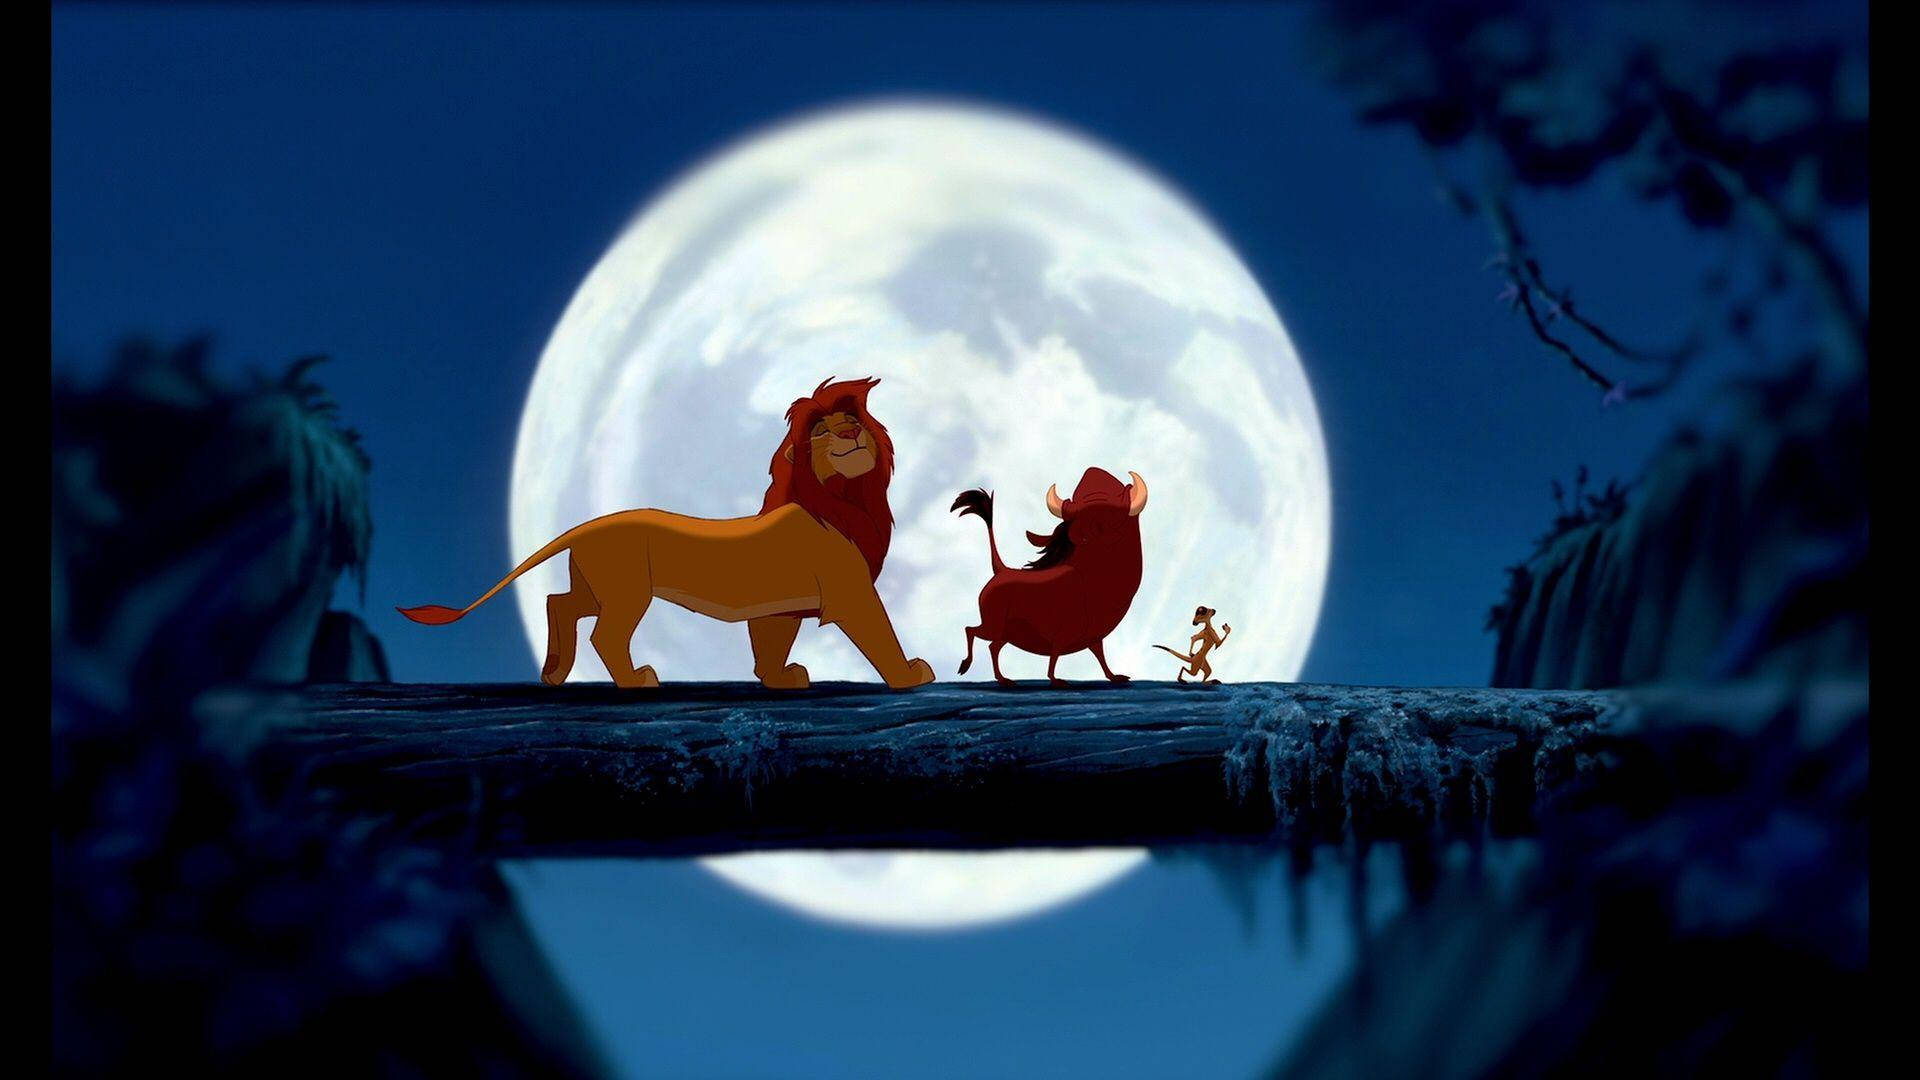 The Lion King Moonlight